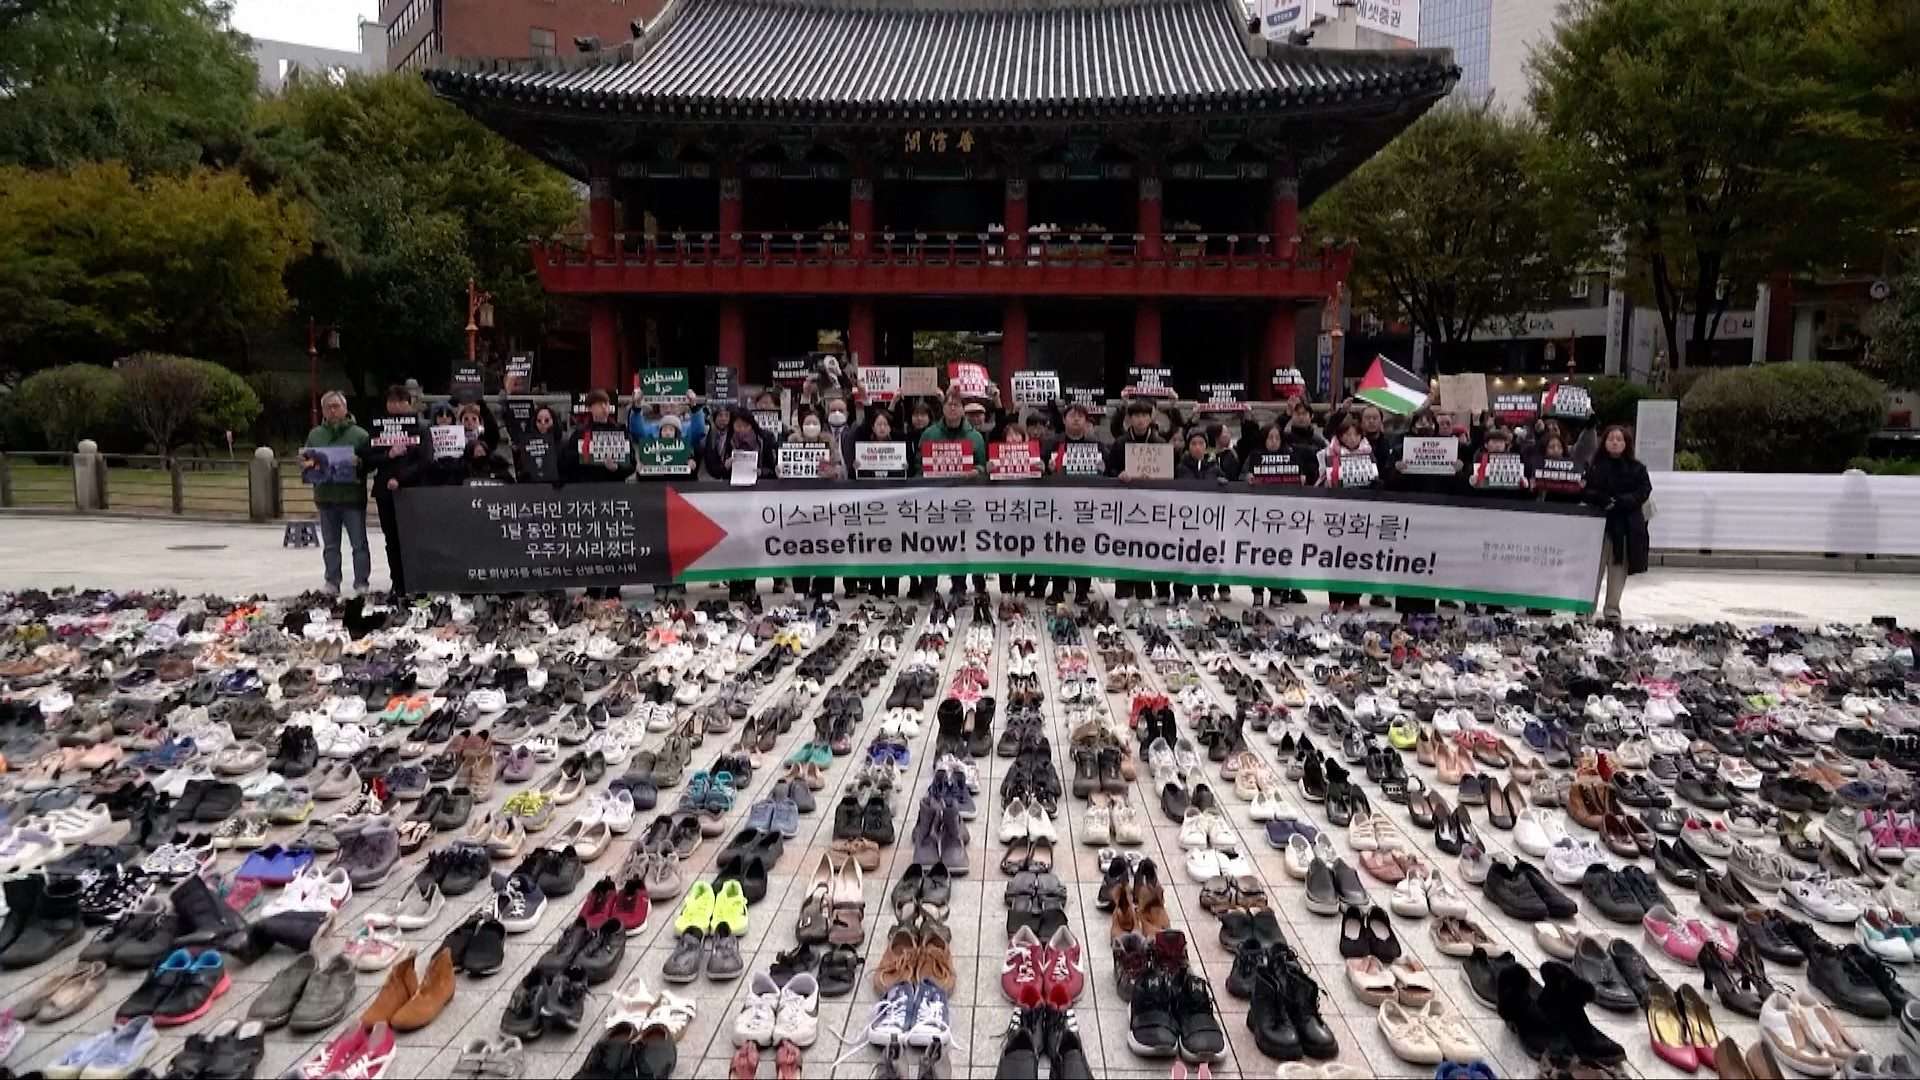 South Korea: Activists use shoes to call for Gaza ceasefire